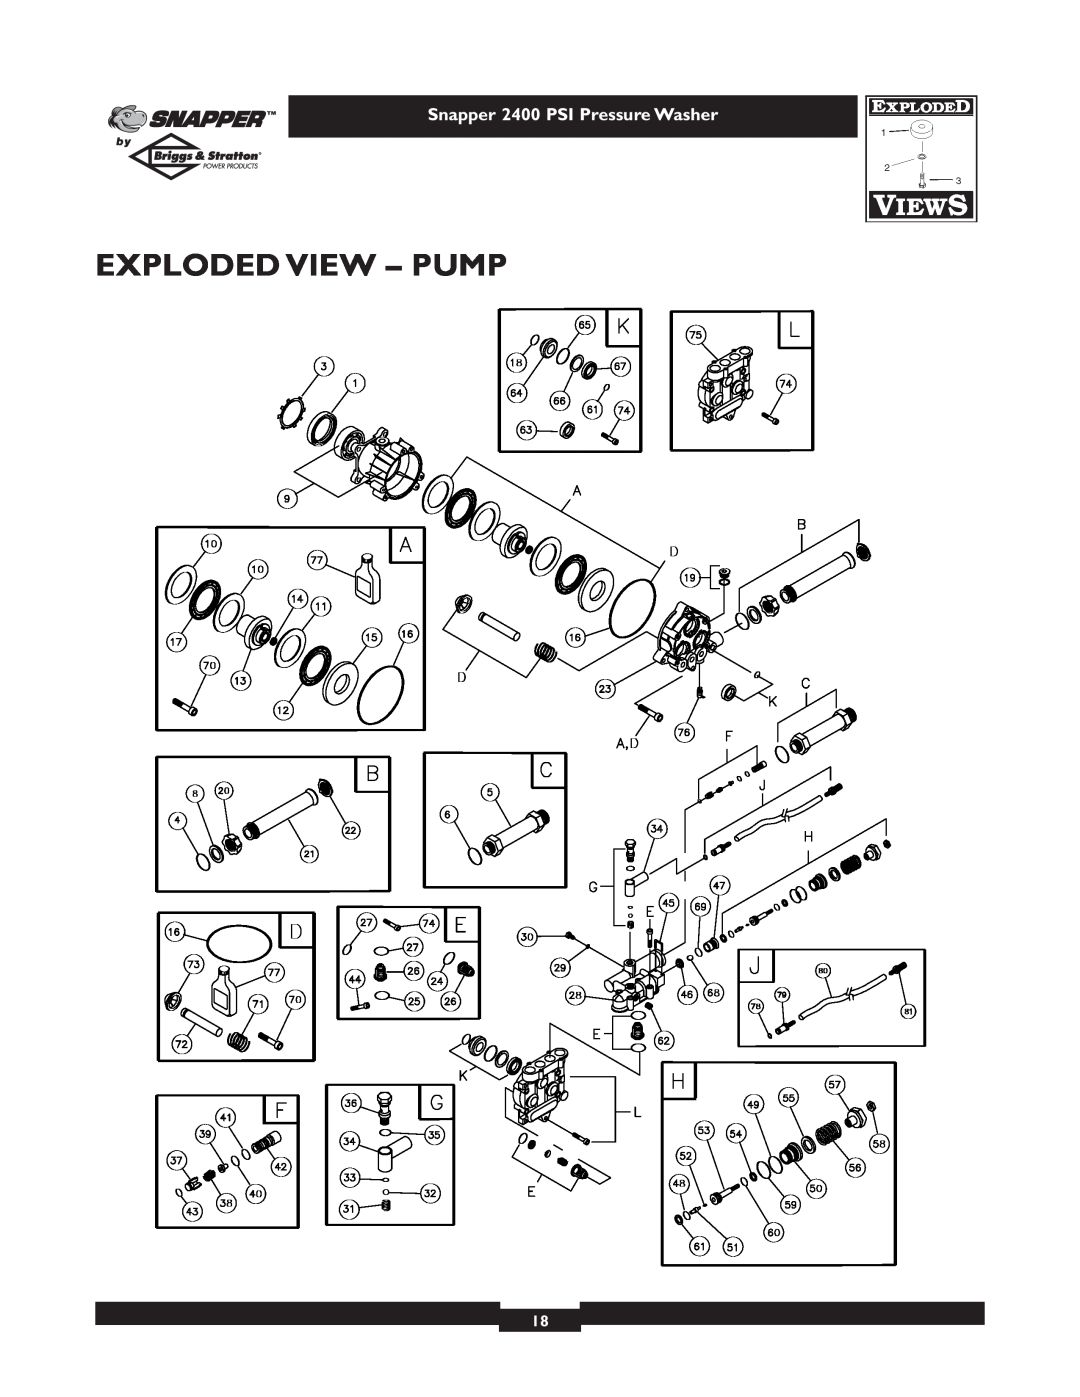 Snapper 1660-0 owner manual Exploded View - Pump, Snapper 2400 PSI Pressure Washer 